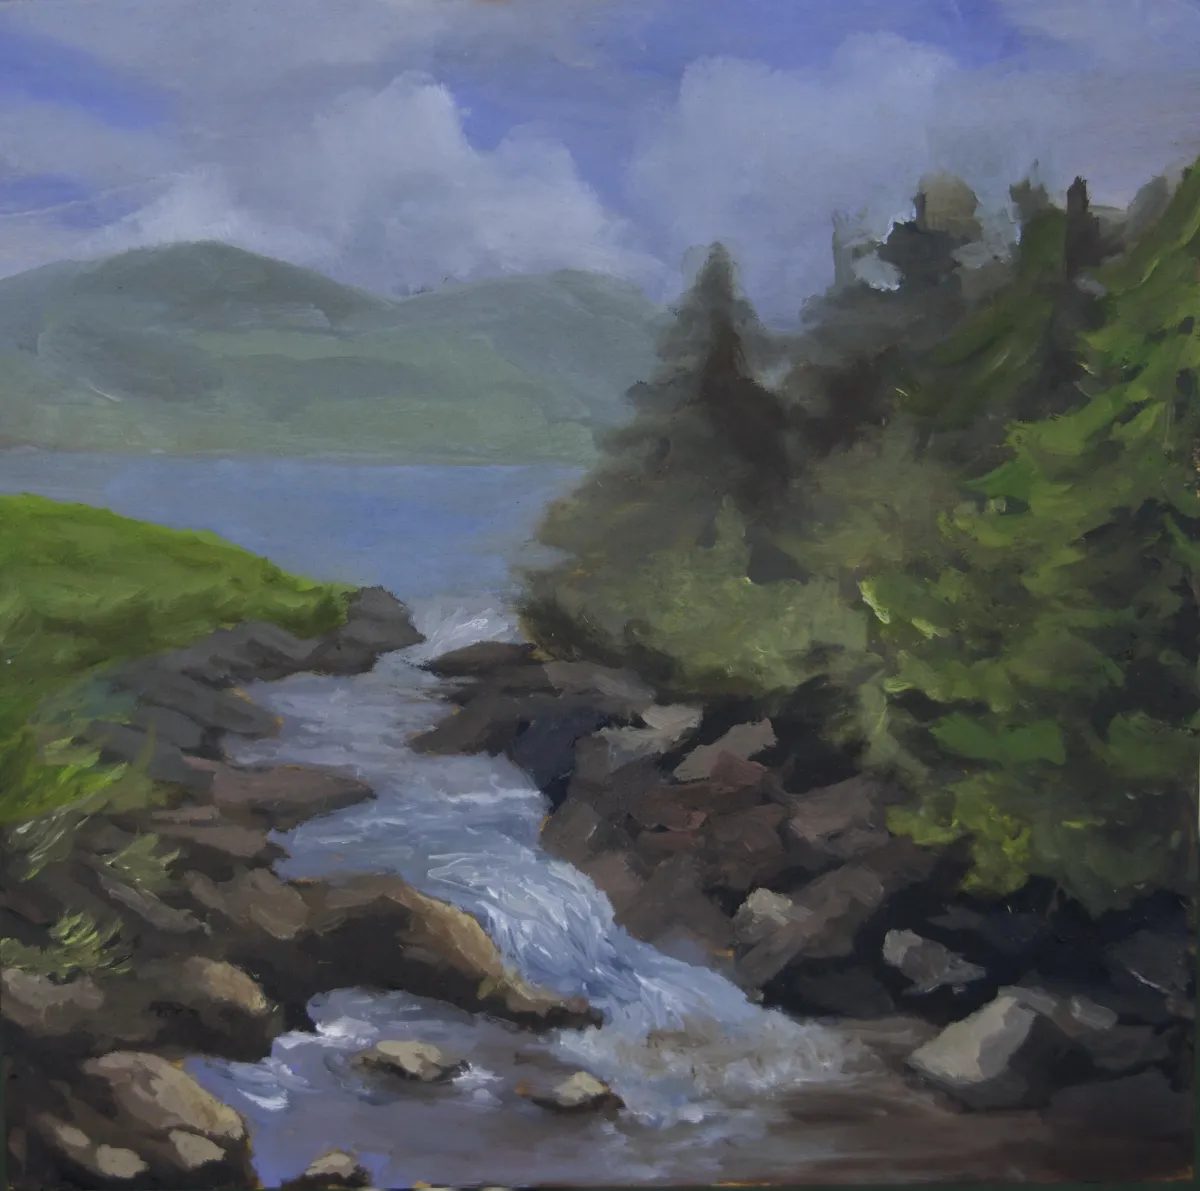 a painting of an Irish landscape with a lake, stream, and pine trees